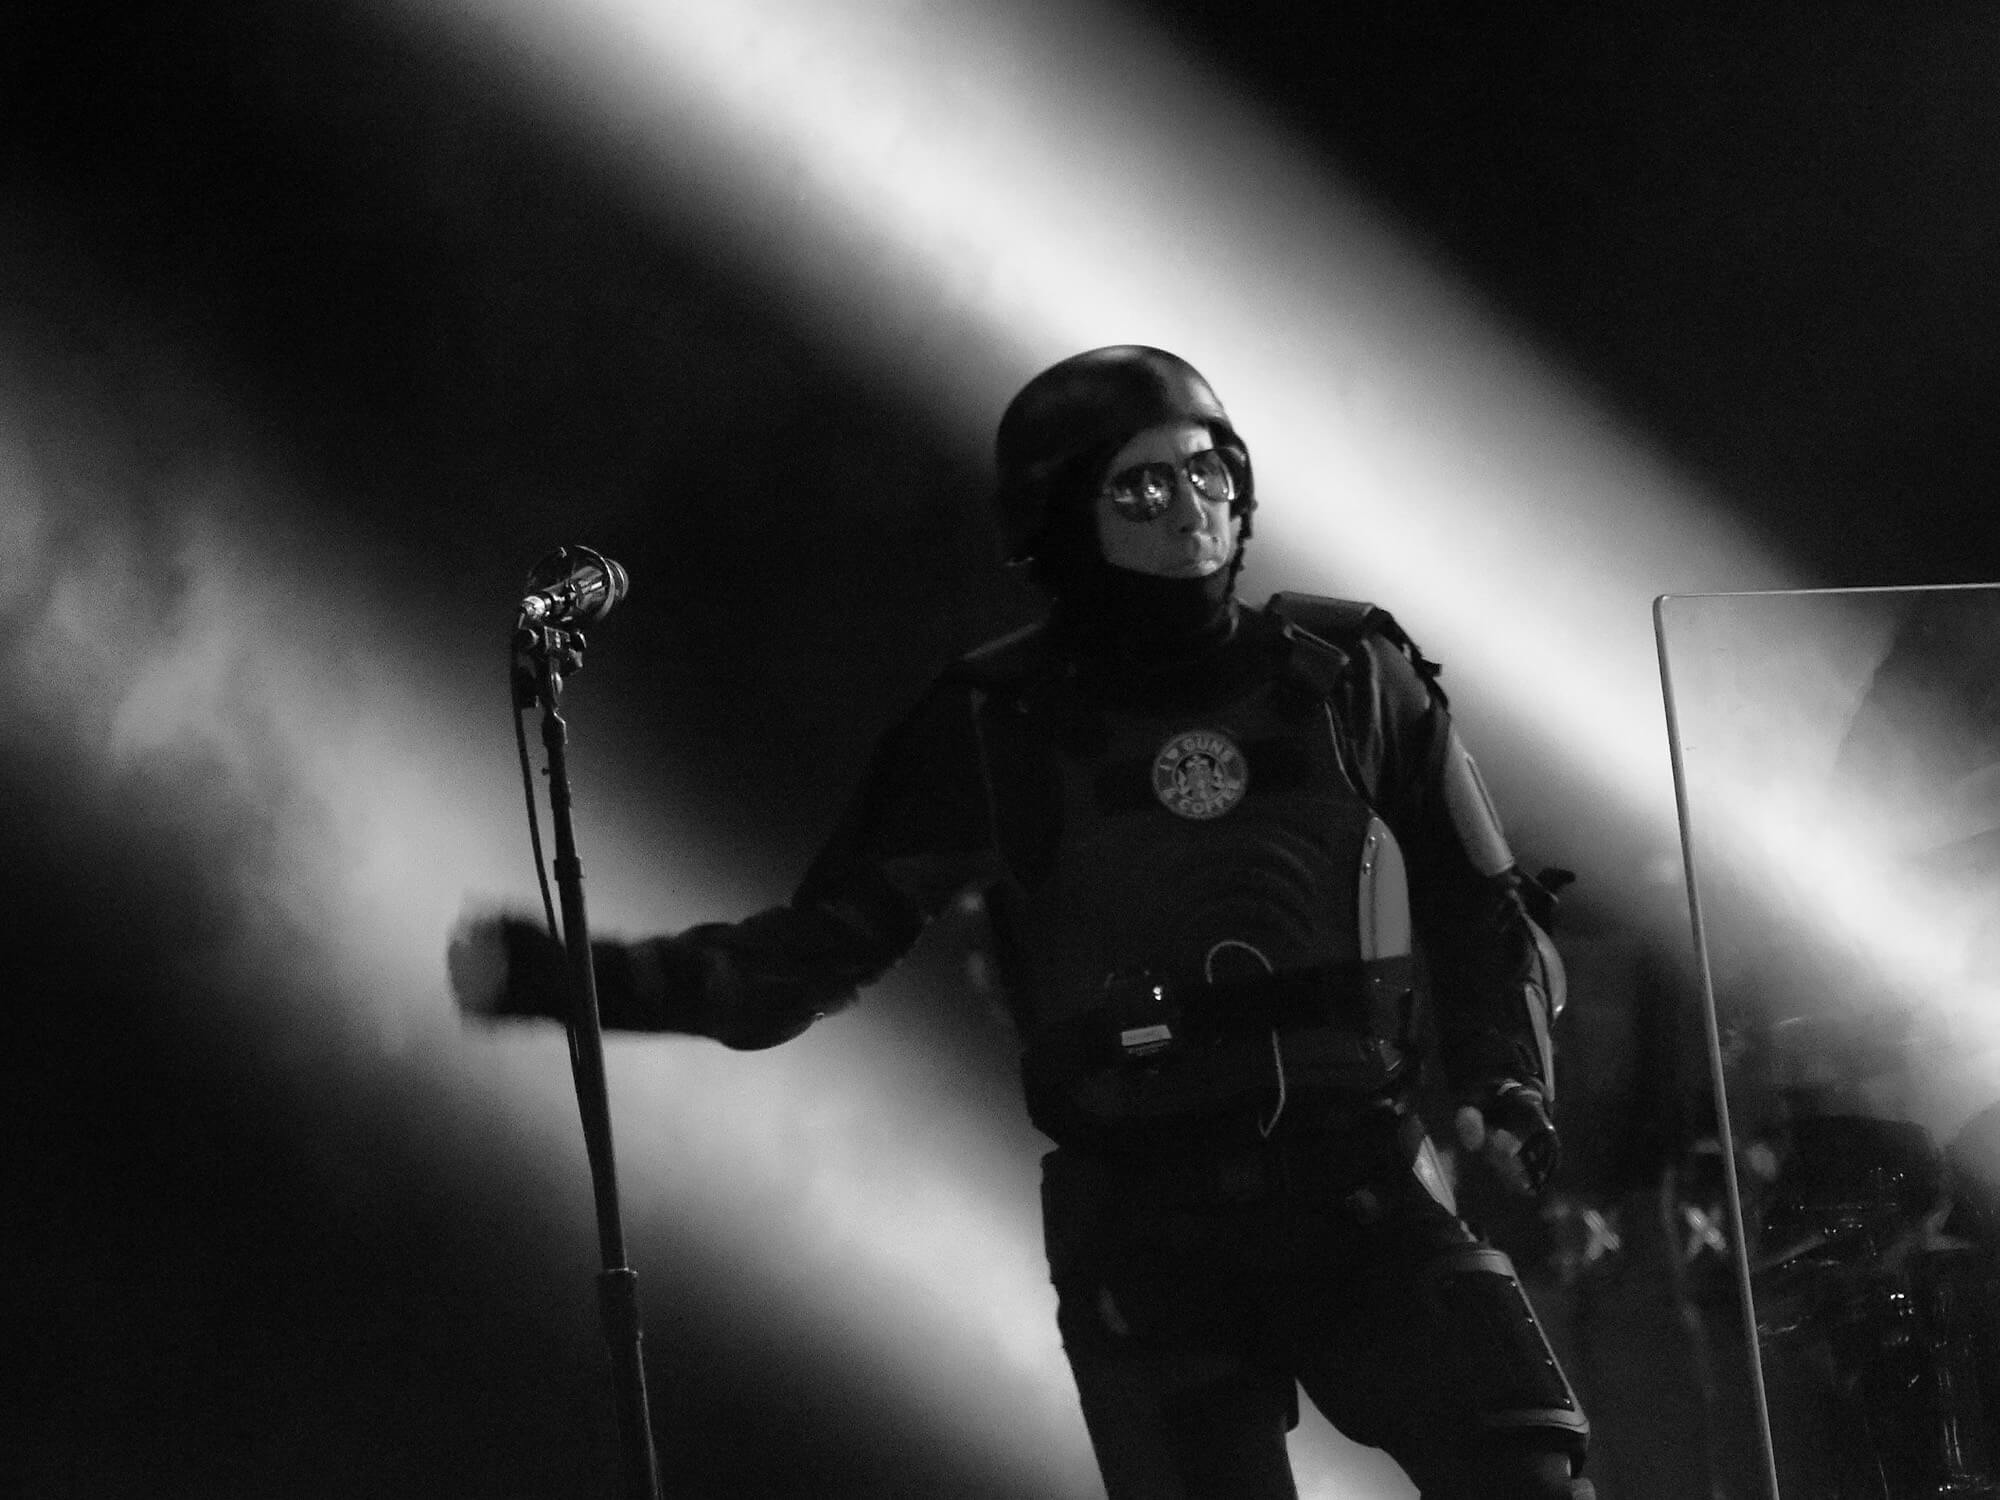 Maynard James Keenan on stage in 2017. He is wearing a helmet and combat suit and is stood next to a mic stand.